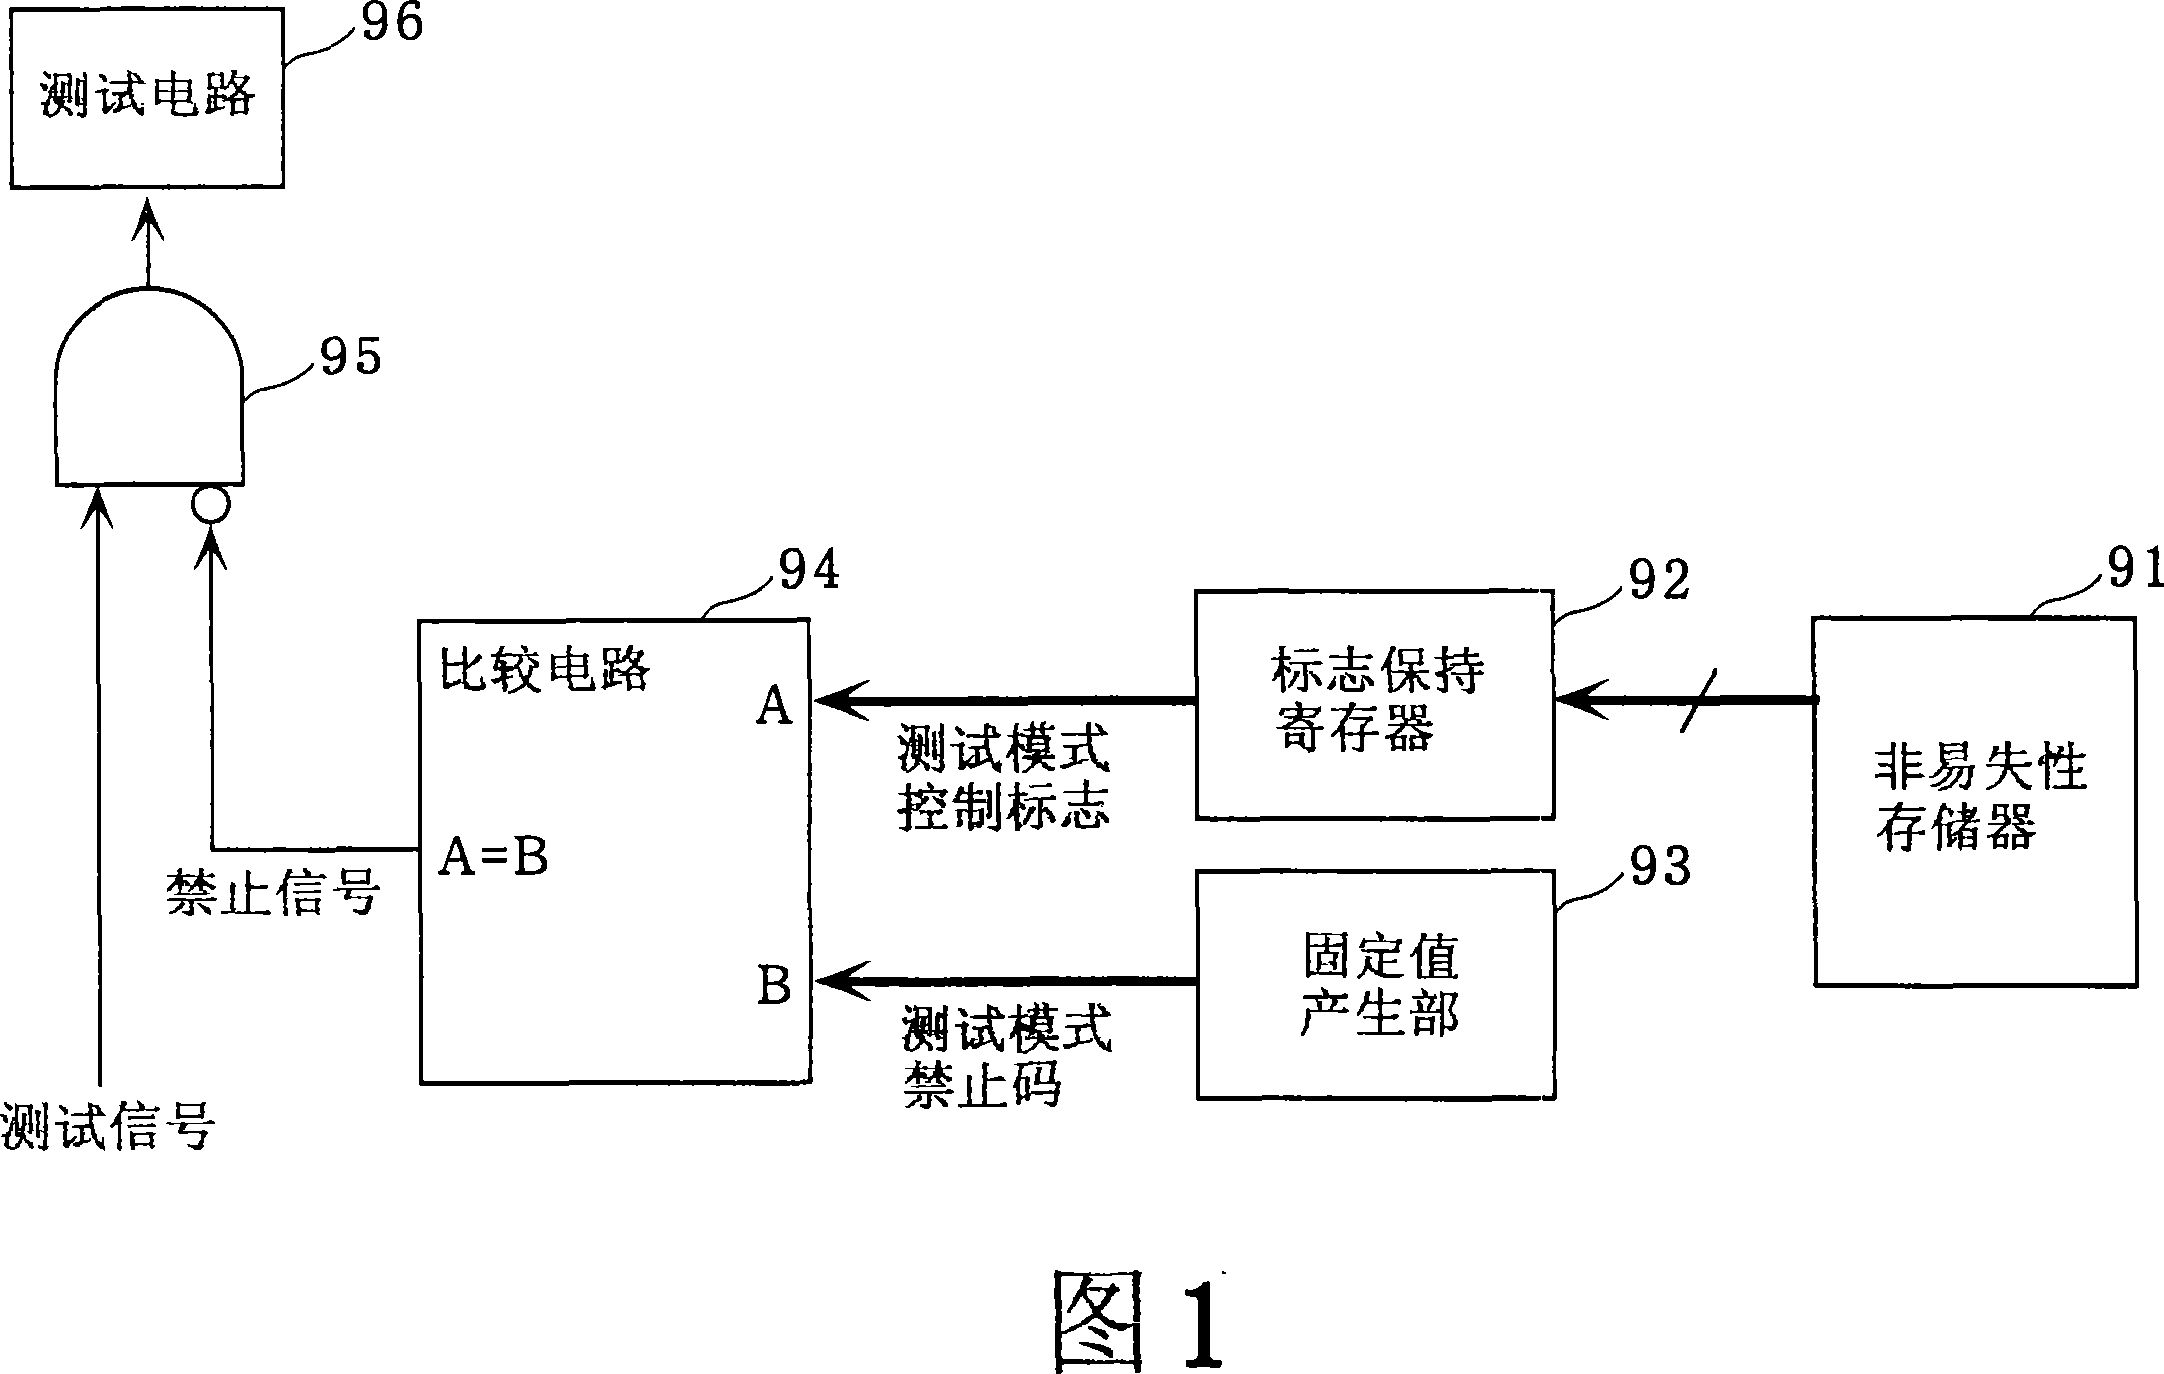 Semiconductor device and test mode control circuit